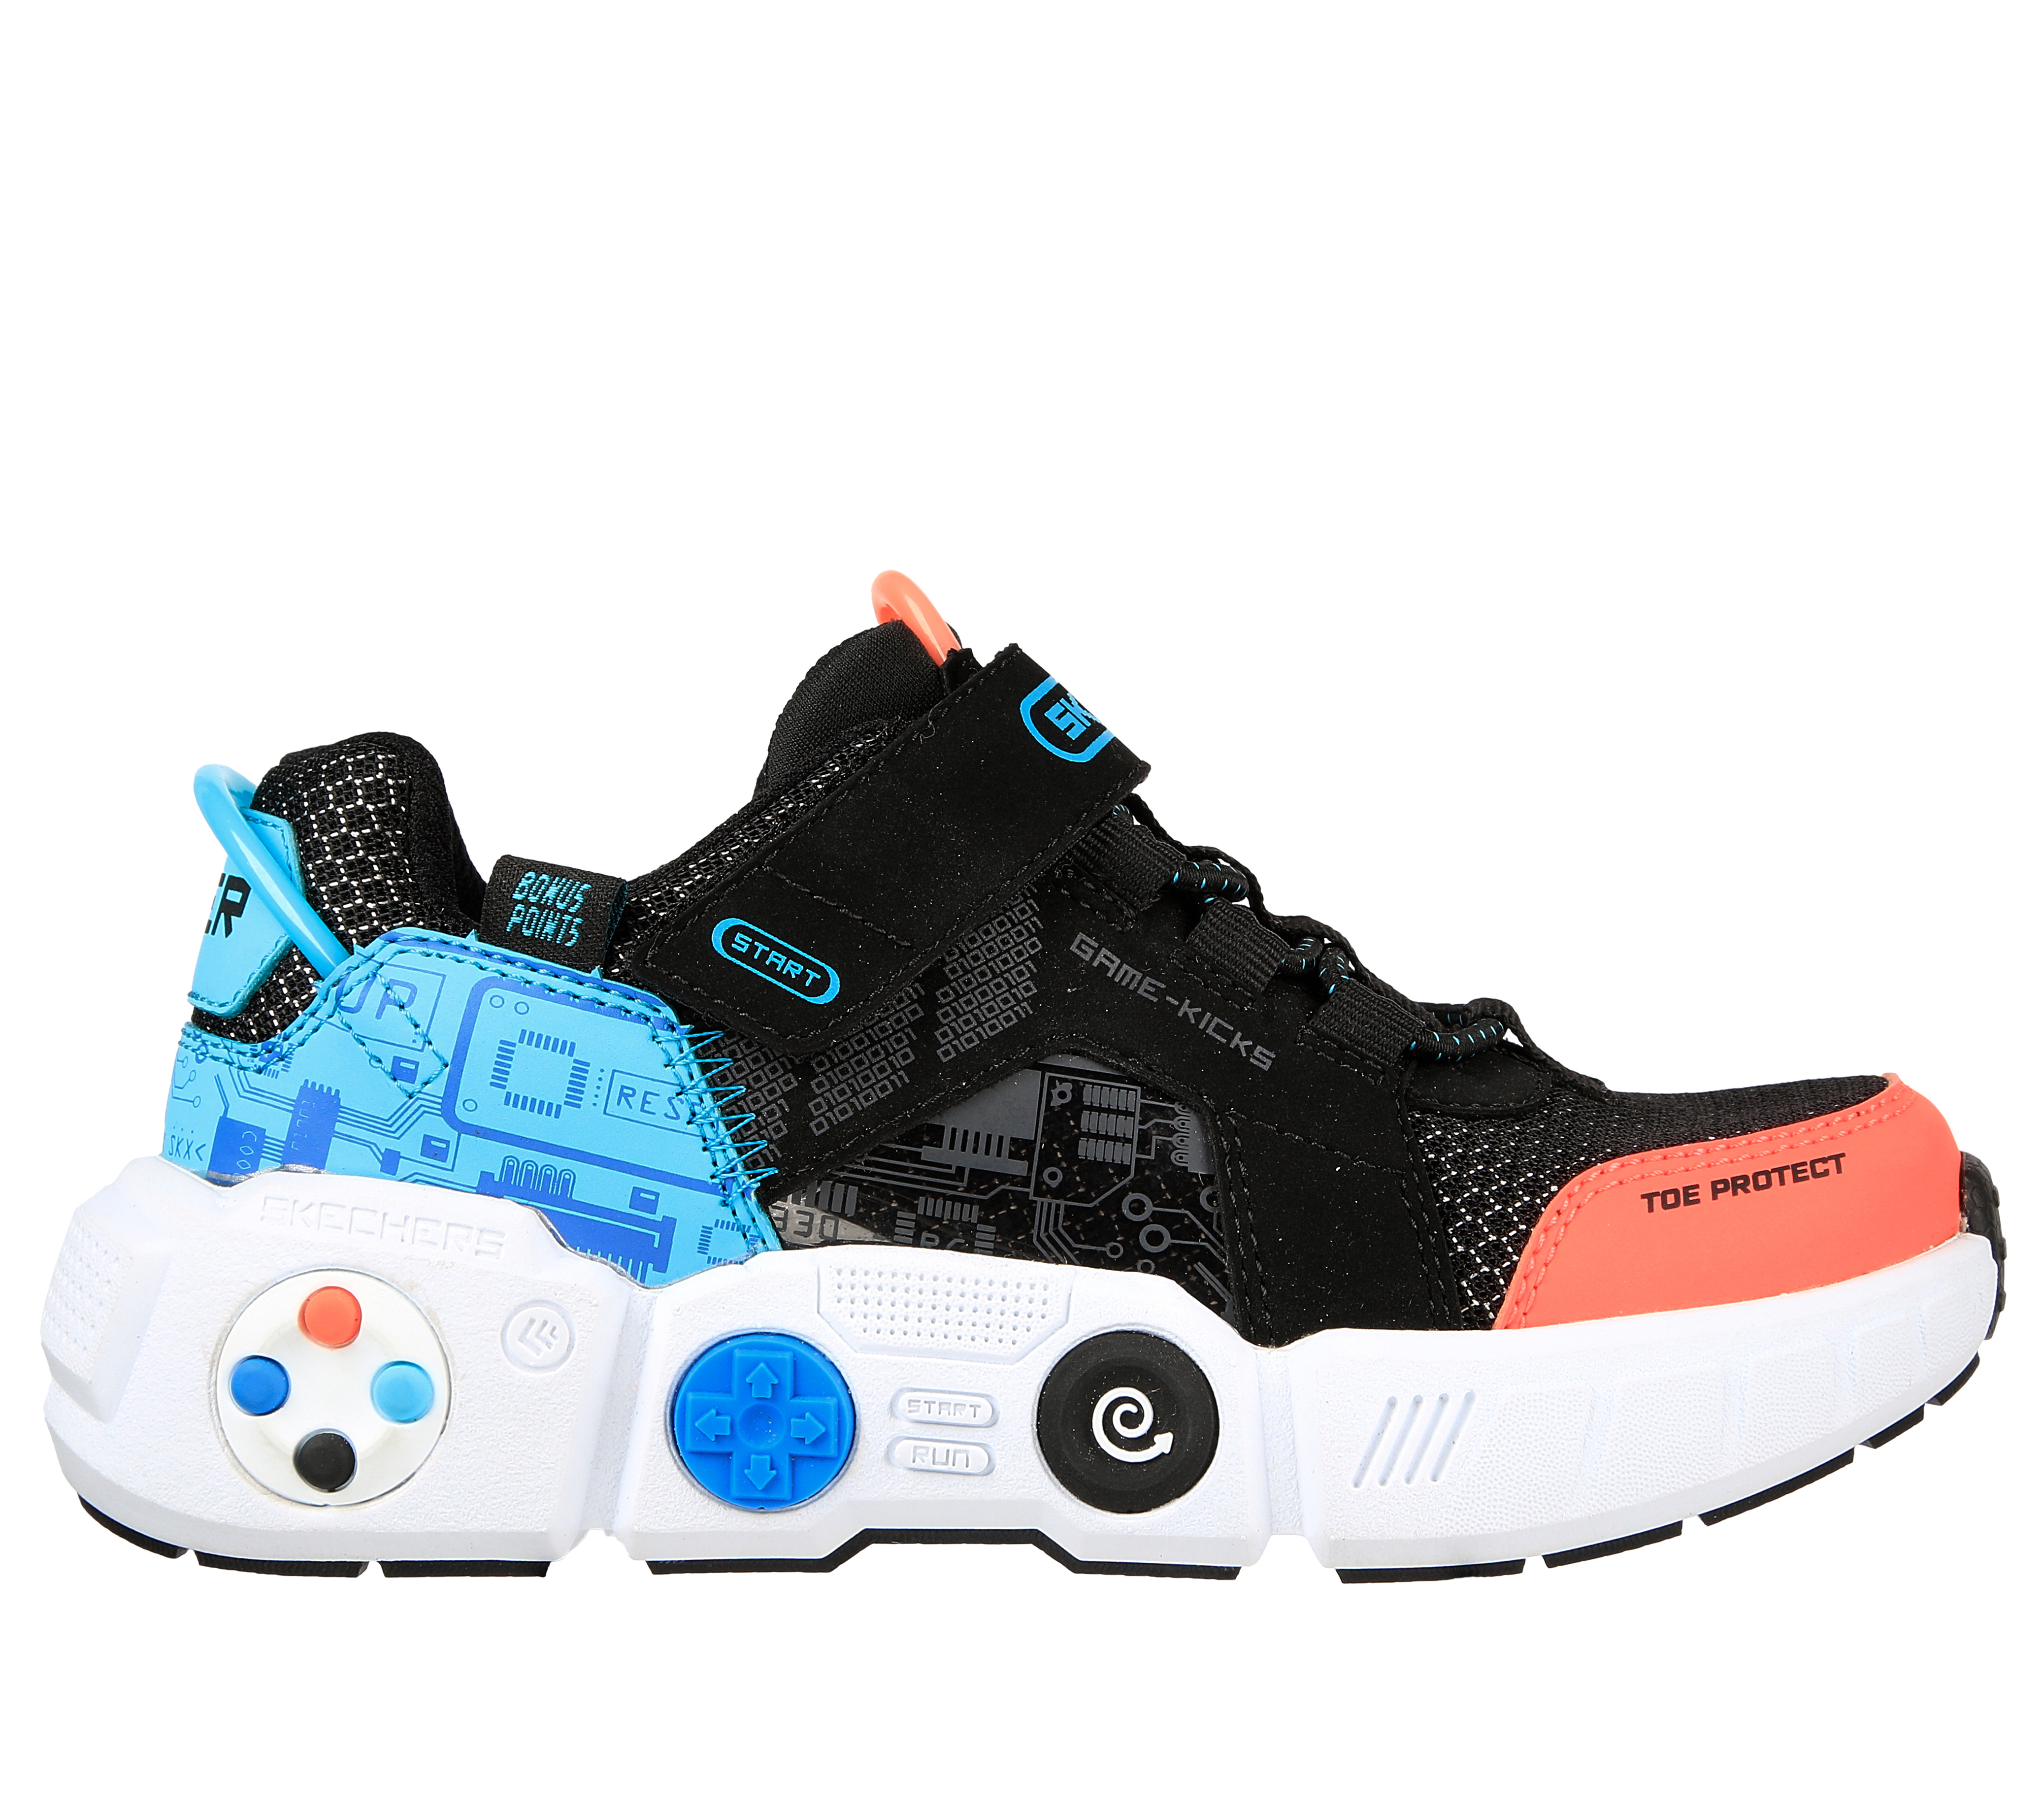 skechers you can play games on